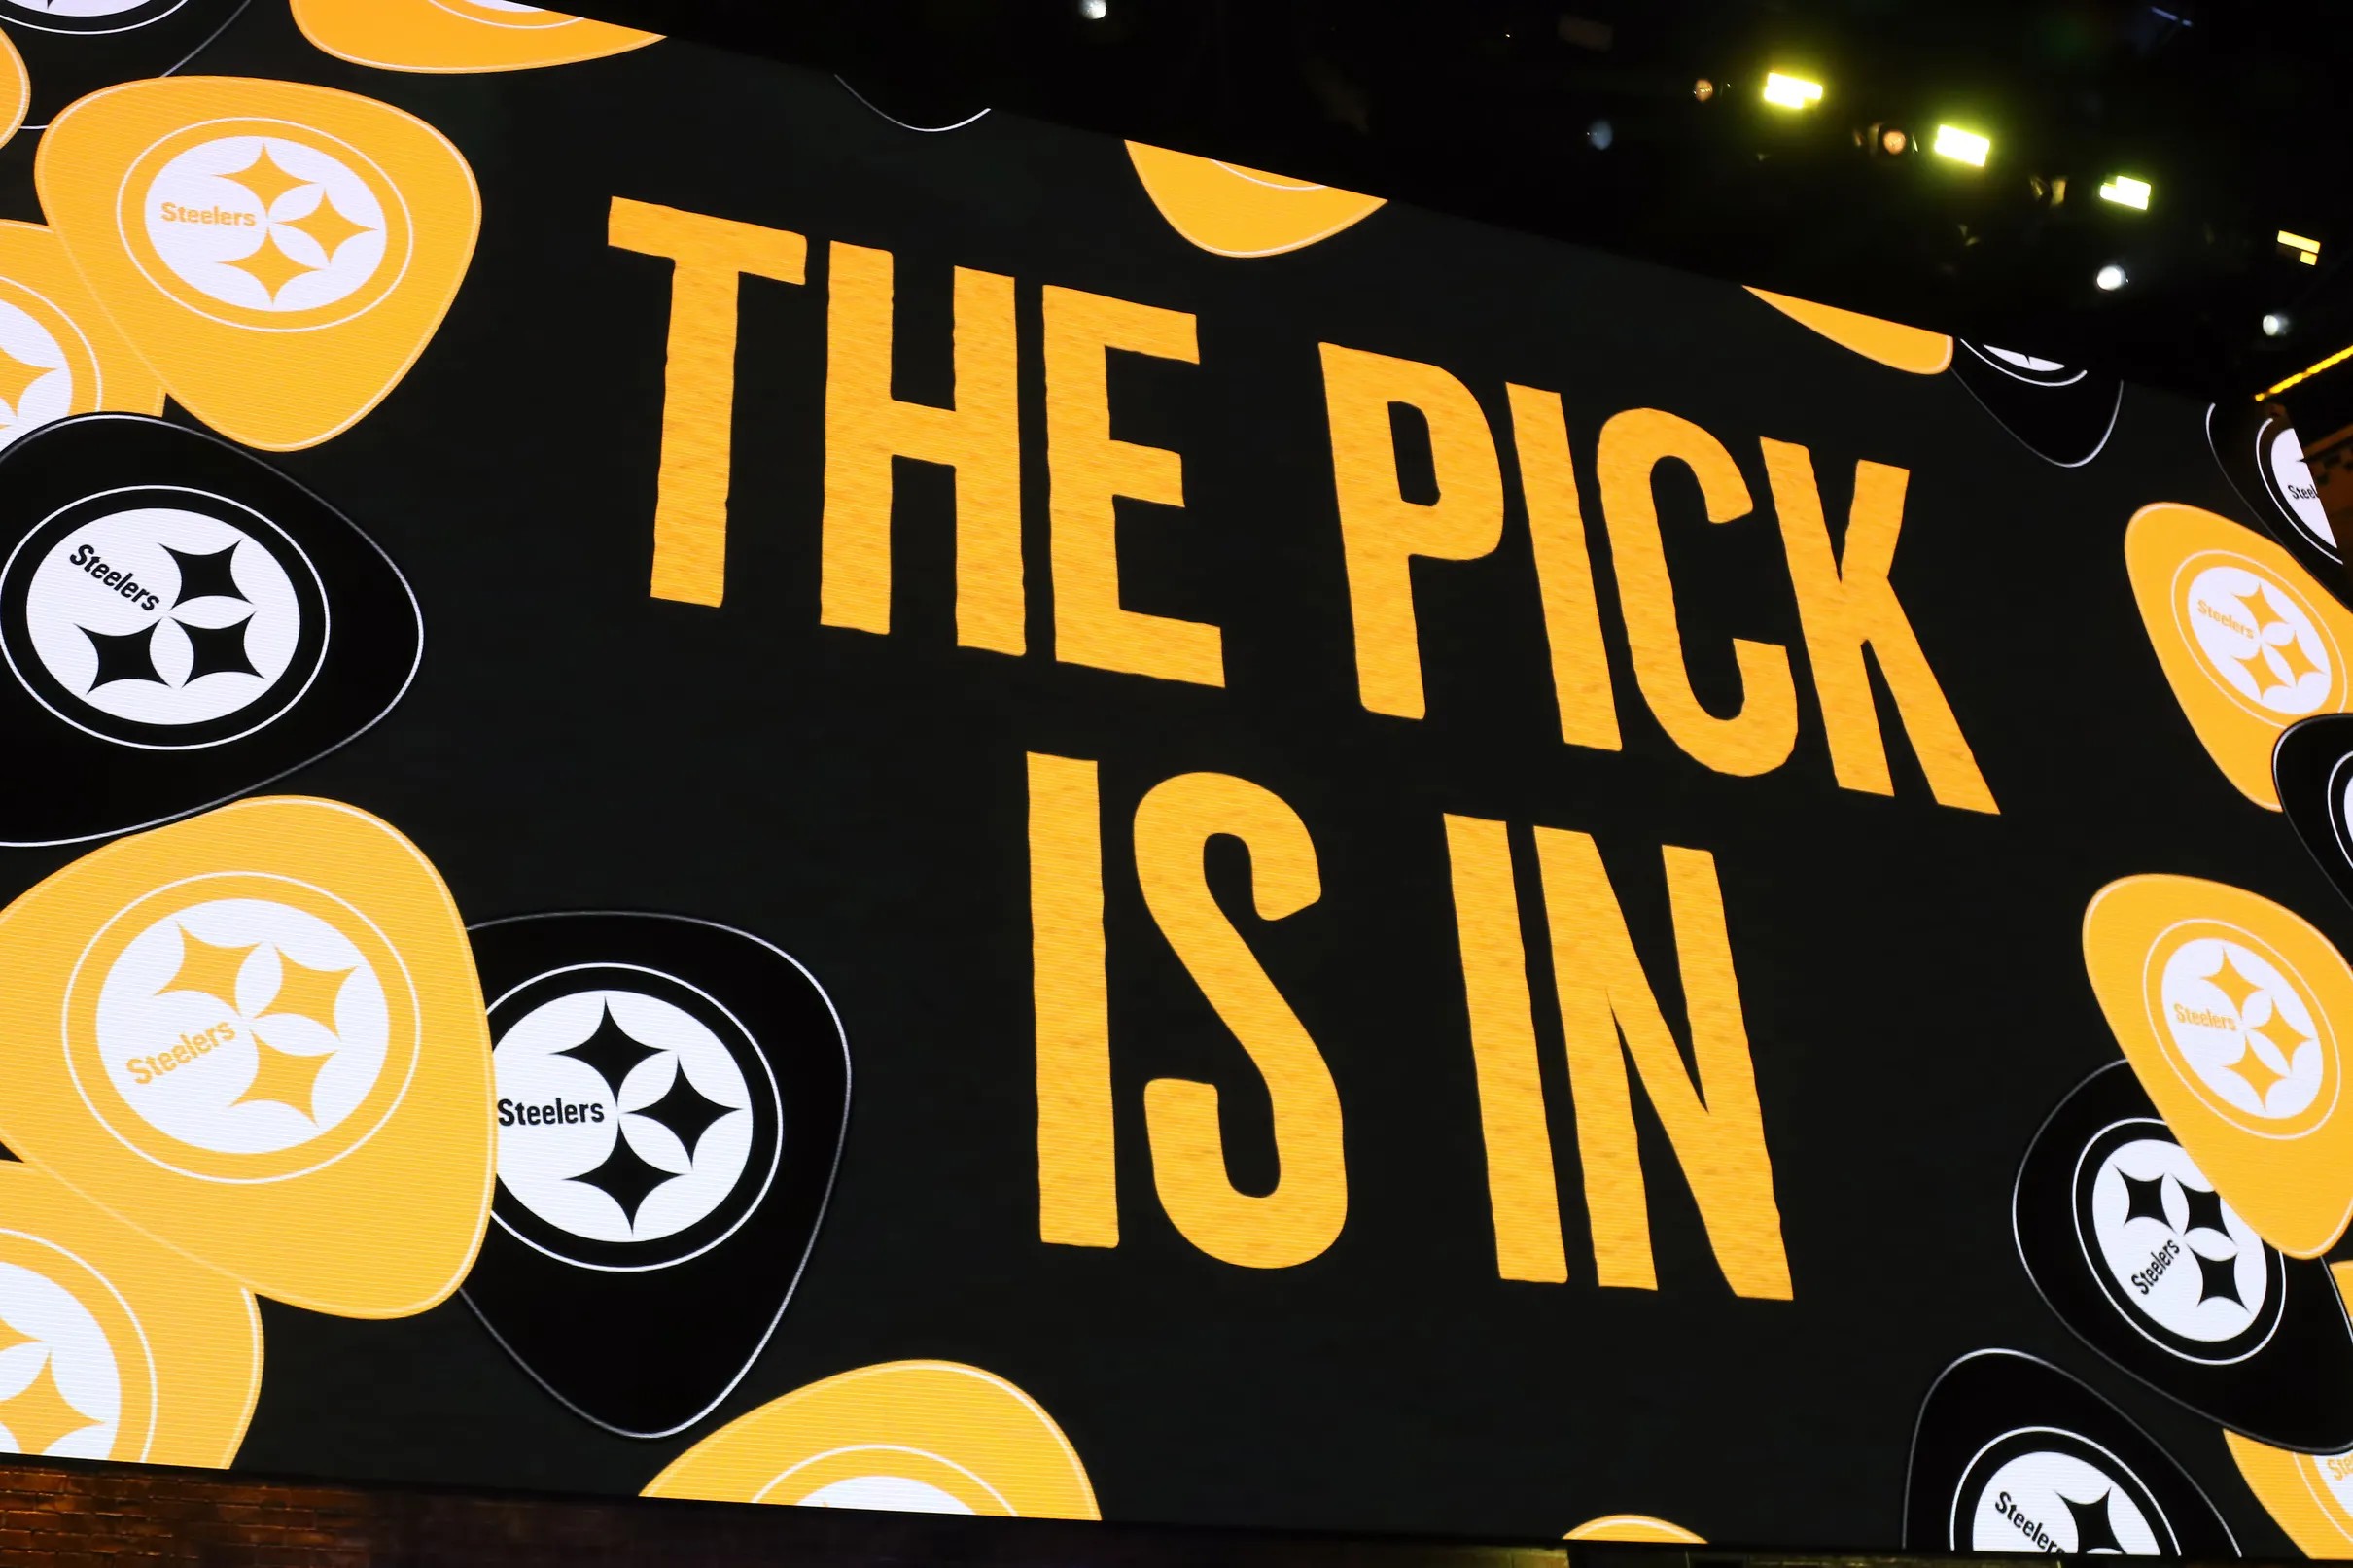 The Steelers officially get a 4th round compensatory draft pick for the